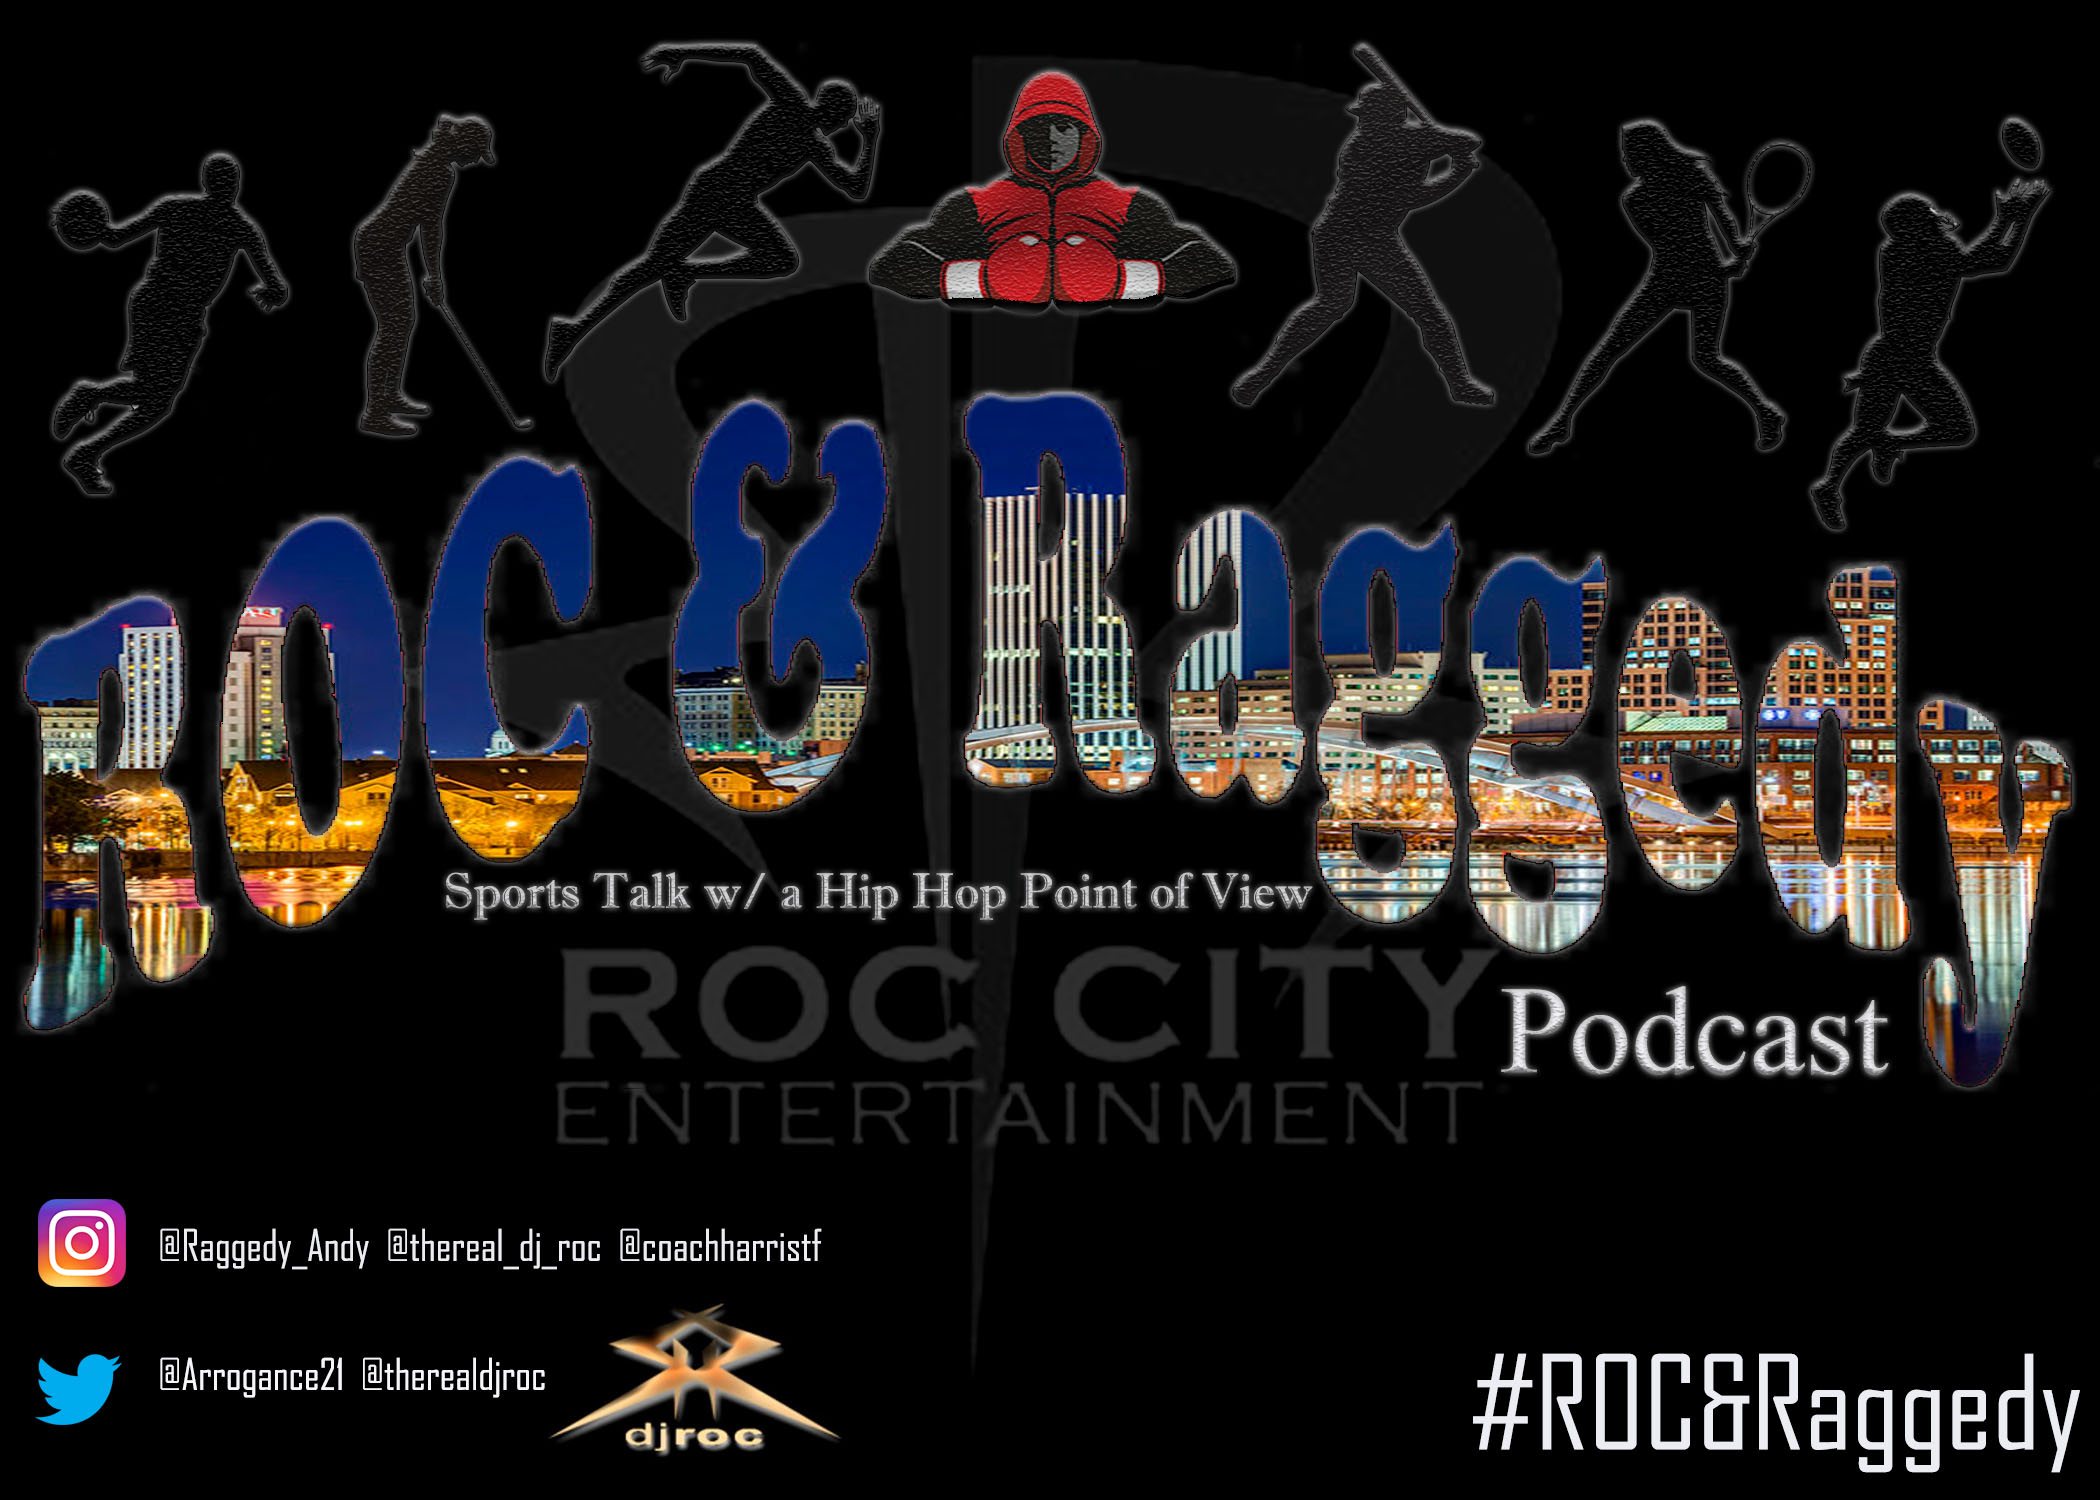 The ROC & Raggedy Podcast - Ep. 08 - 07-10-19